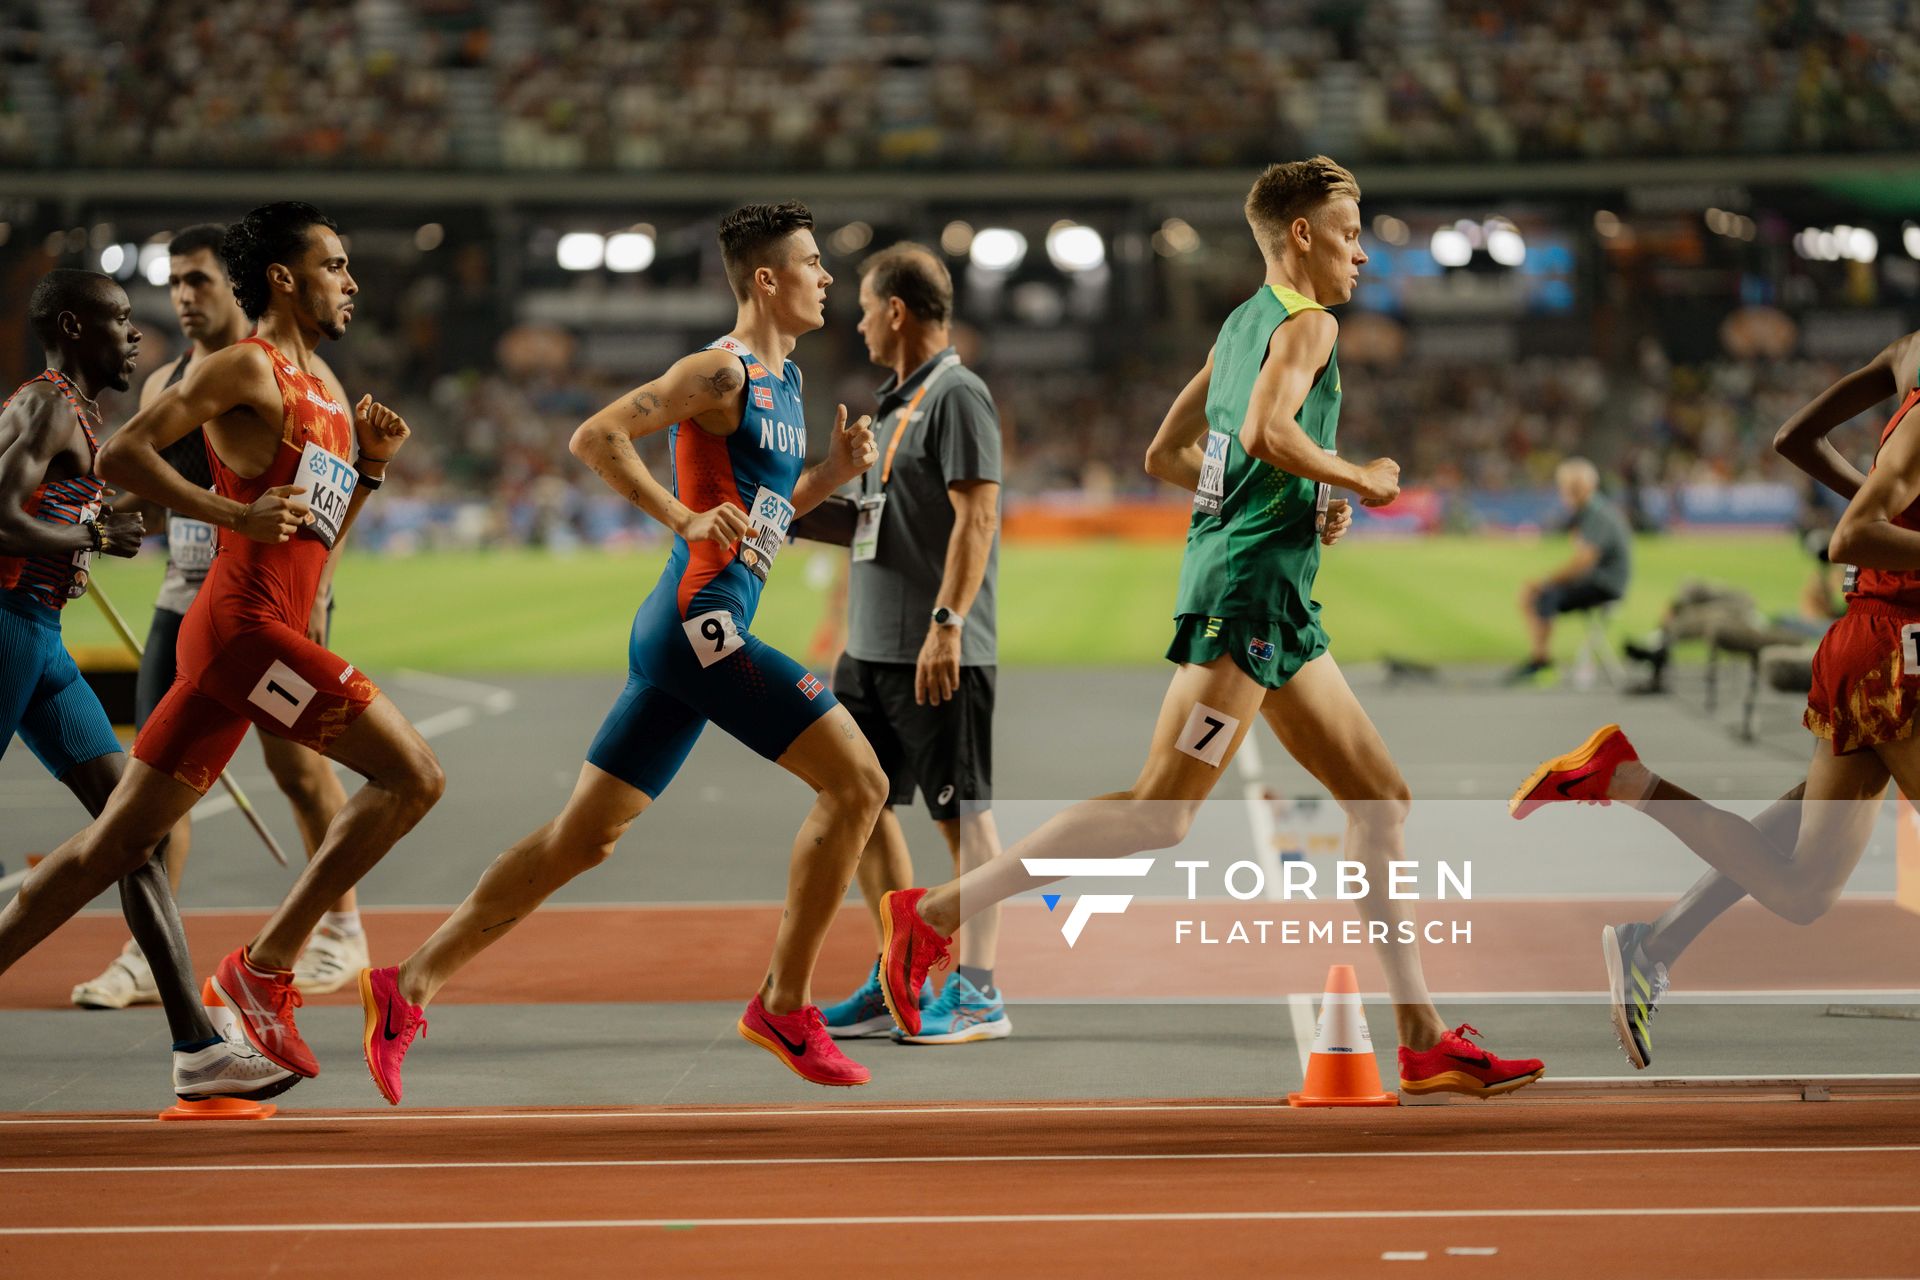 Mohamed Katir (ESP/Spain), Jakob Ingebrigtsen (NOR/Norway) during the 5000 Metres on Day 9 of the World Athletics Championships Budapest 23 at the National Athletics Centre in Budapest, Hungary on August 27, 2023.